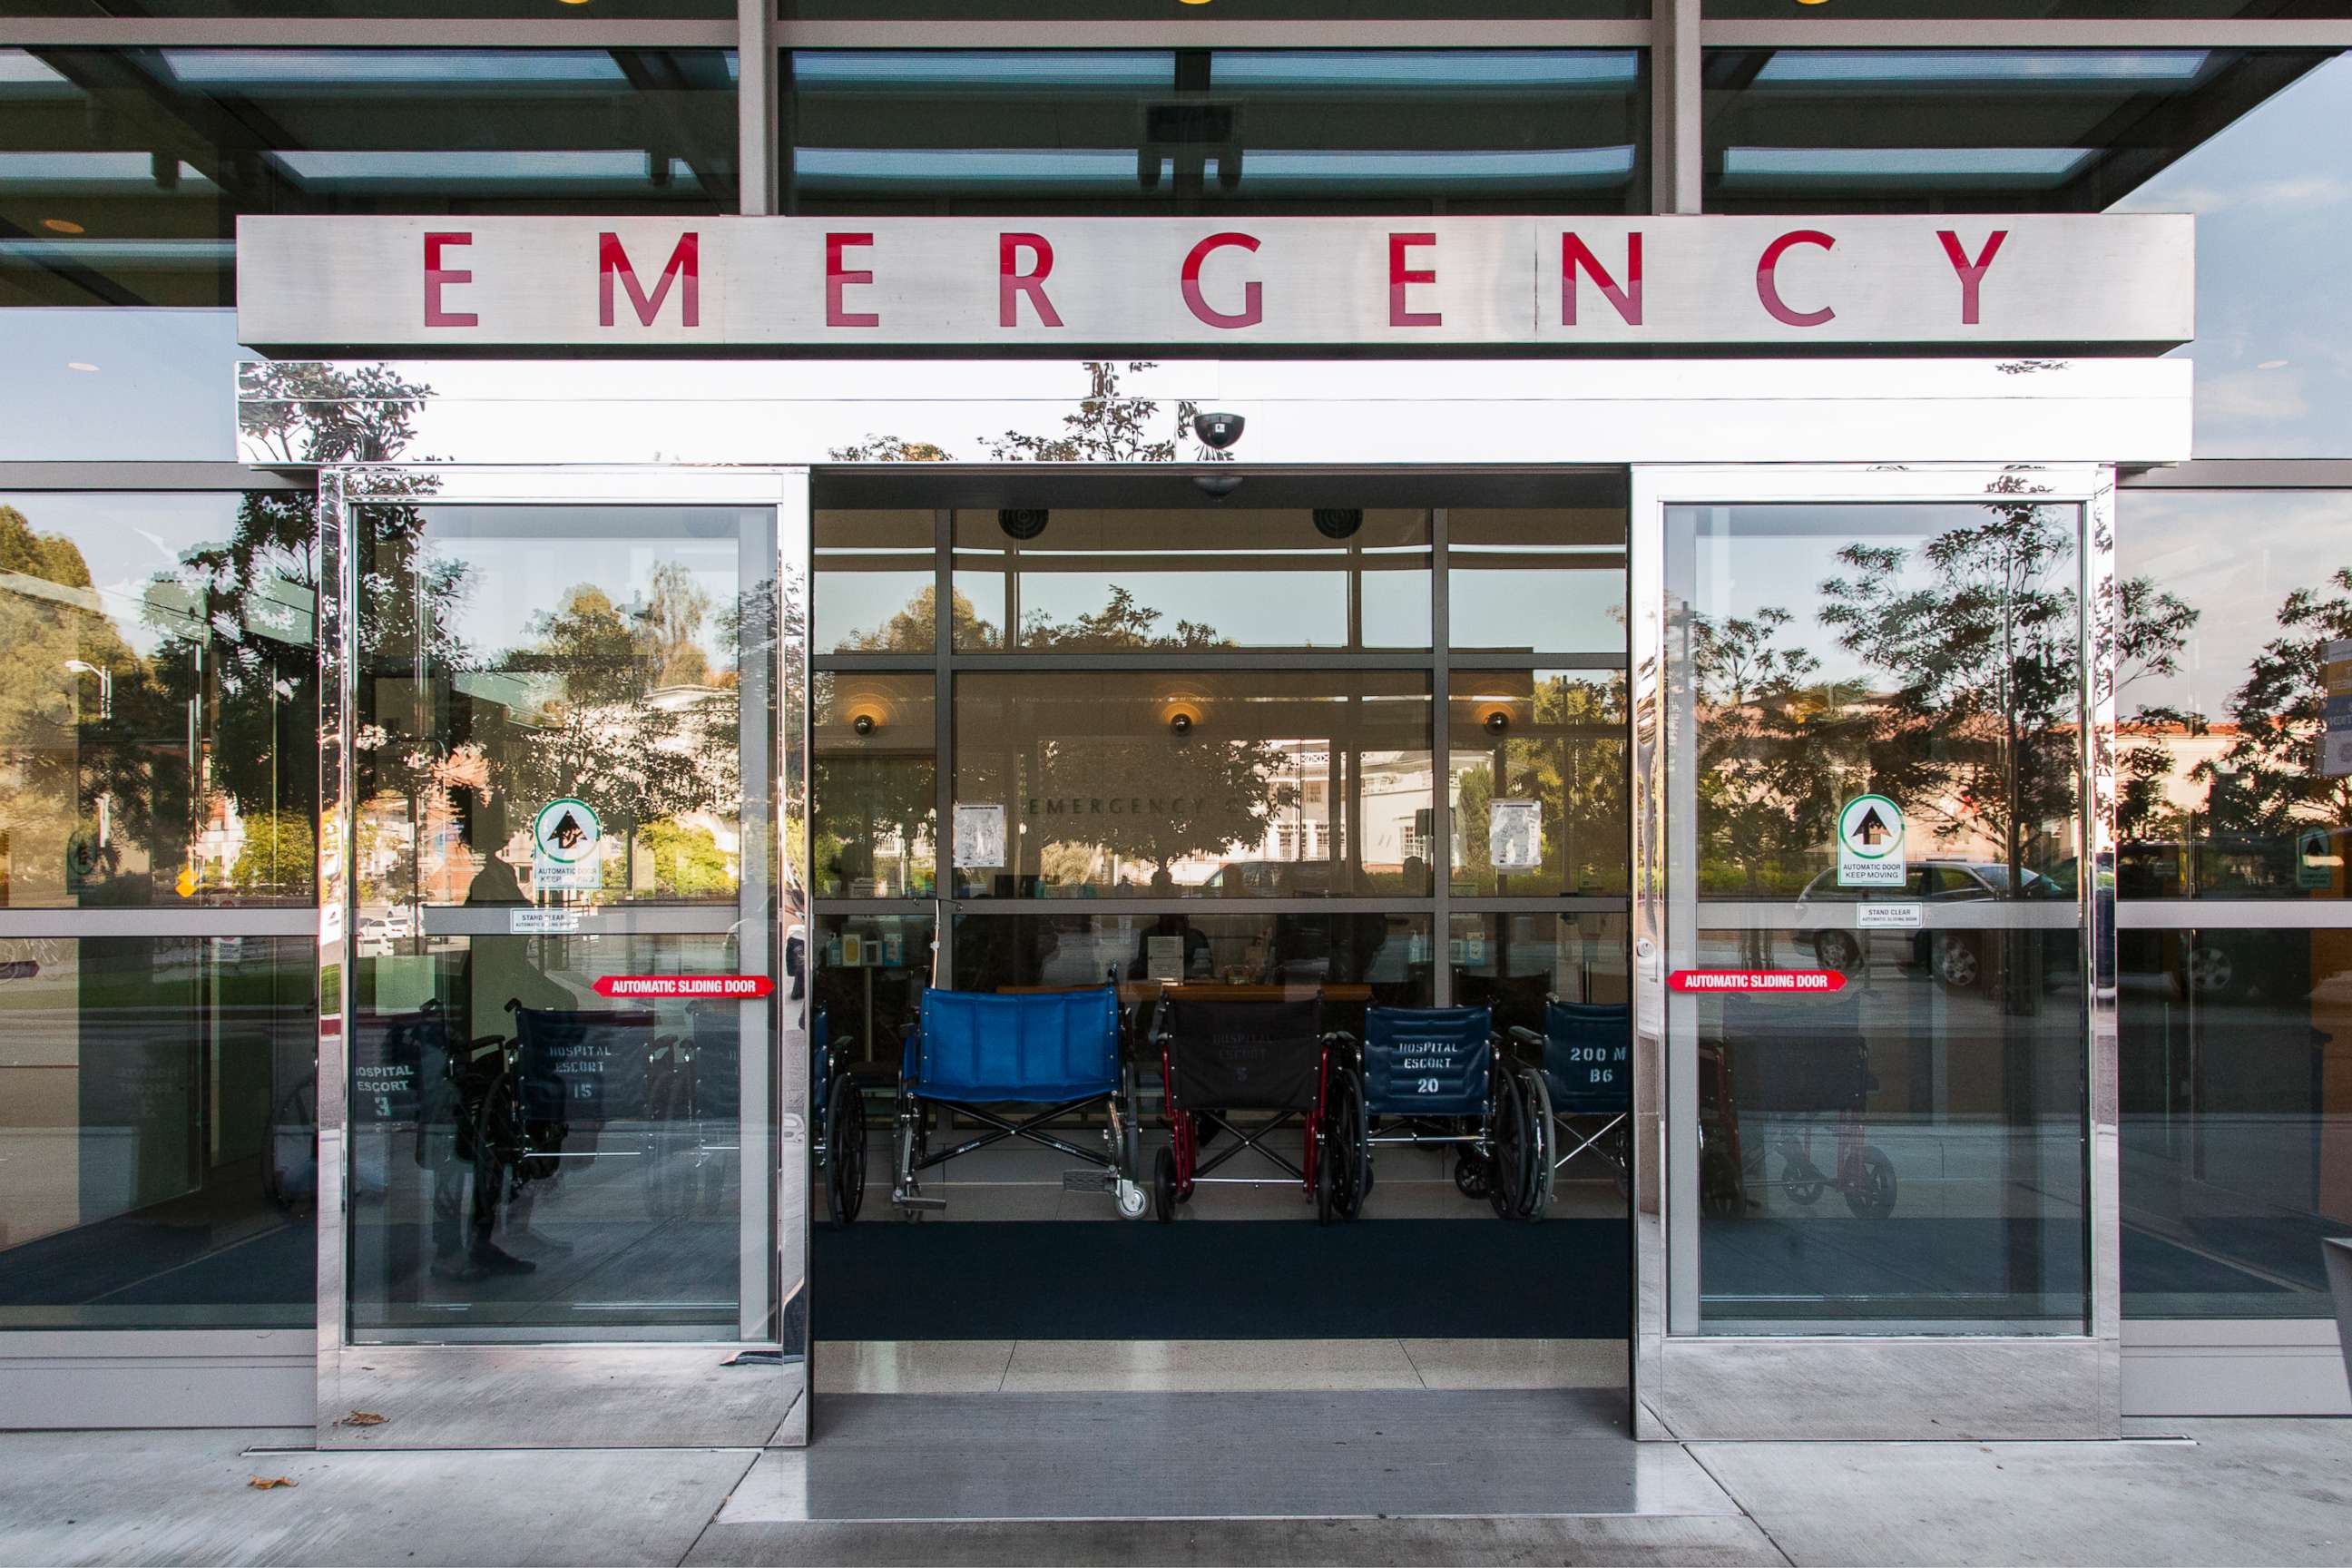 PHOTO: The entrance of a hospital emergency room appears in this undated stock photo.